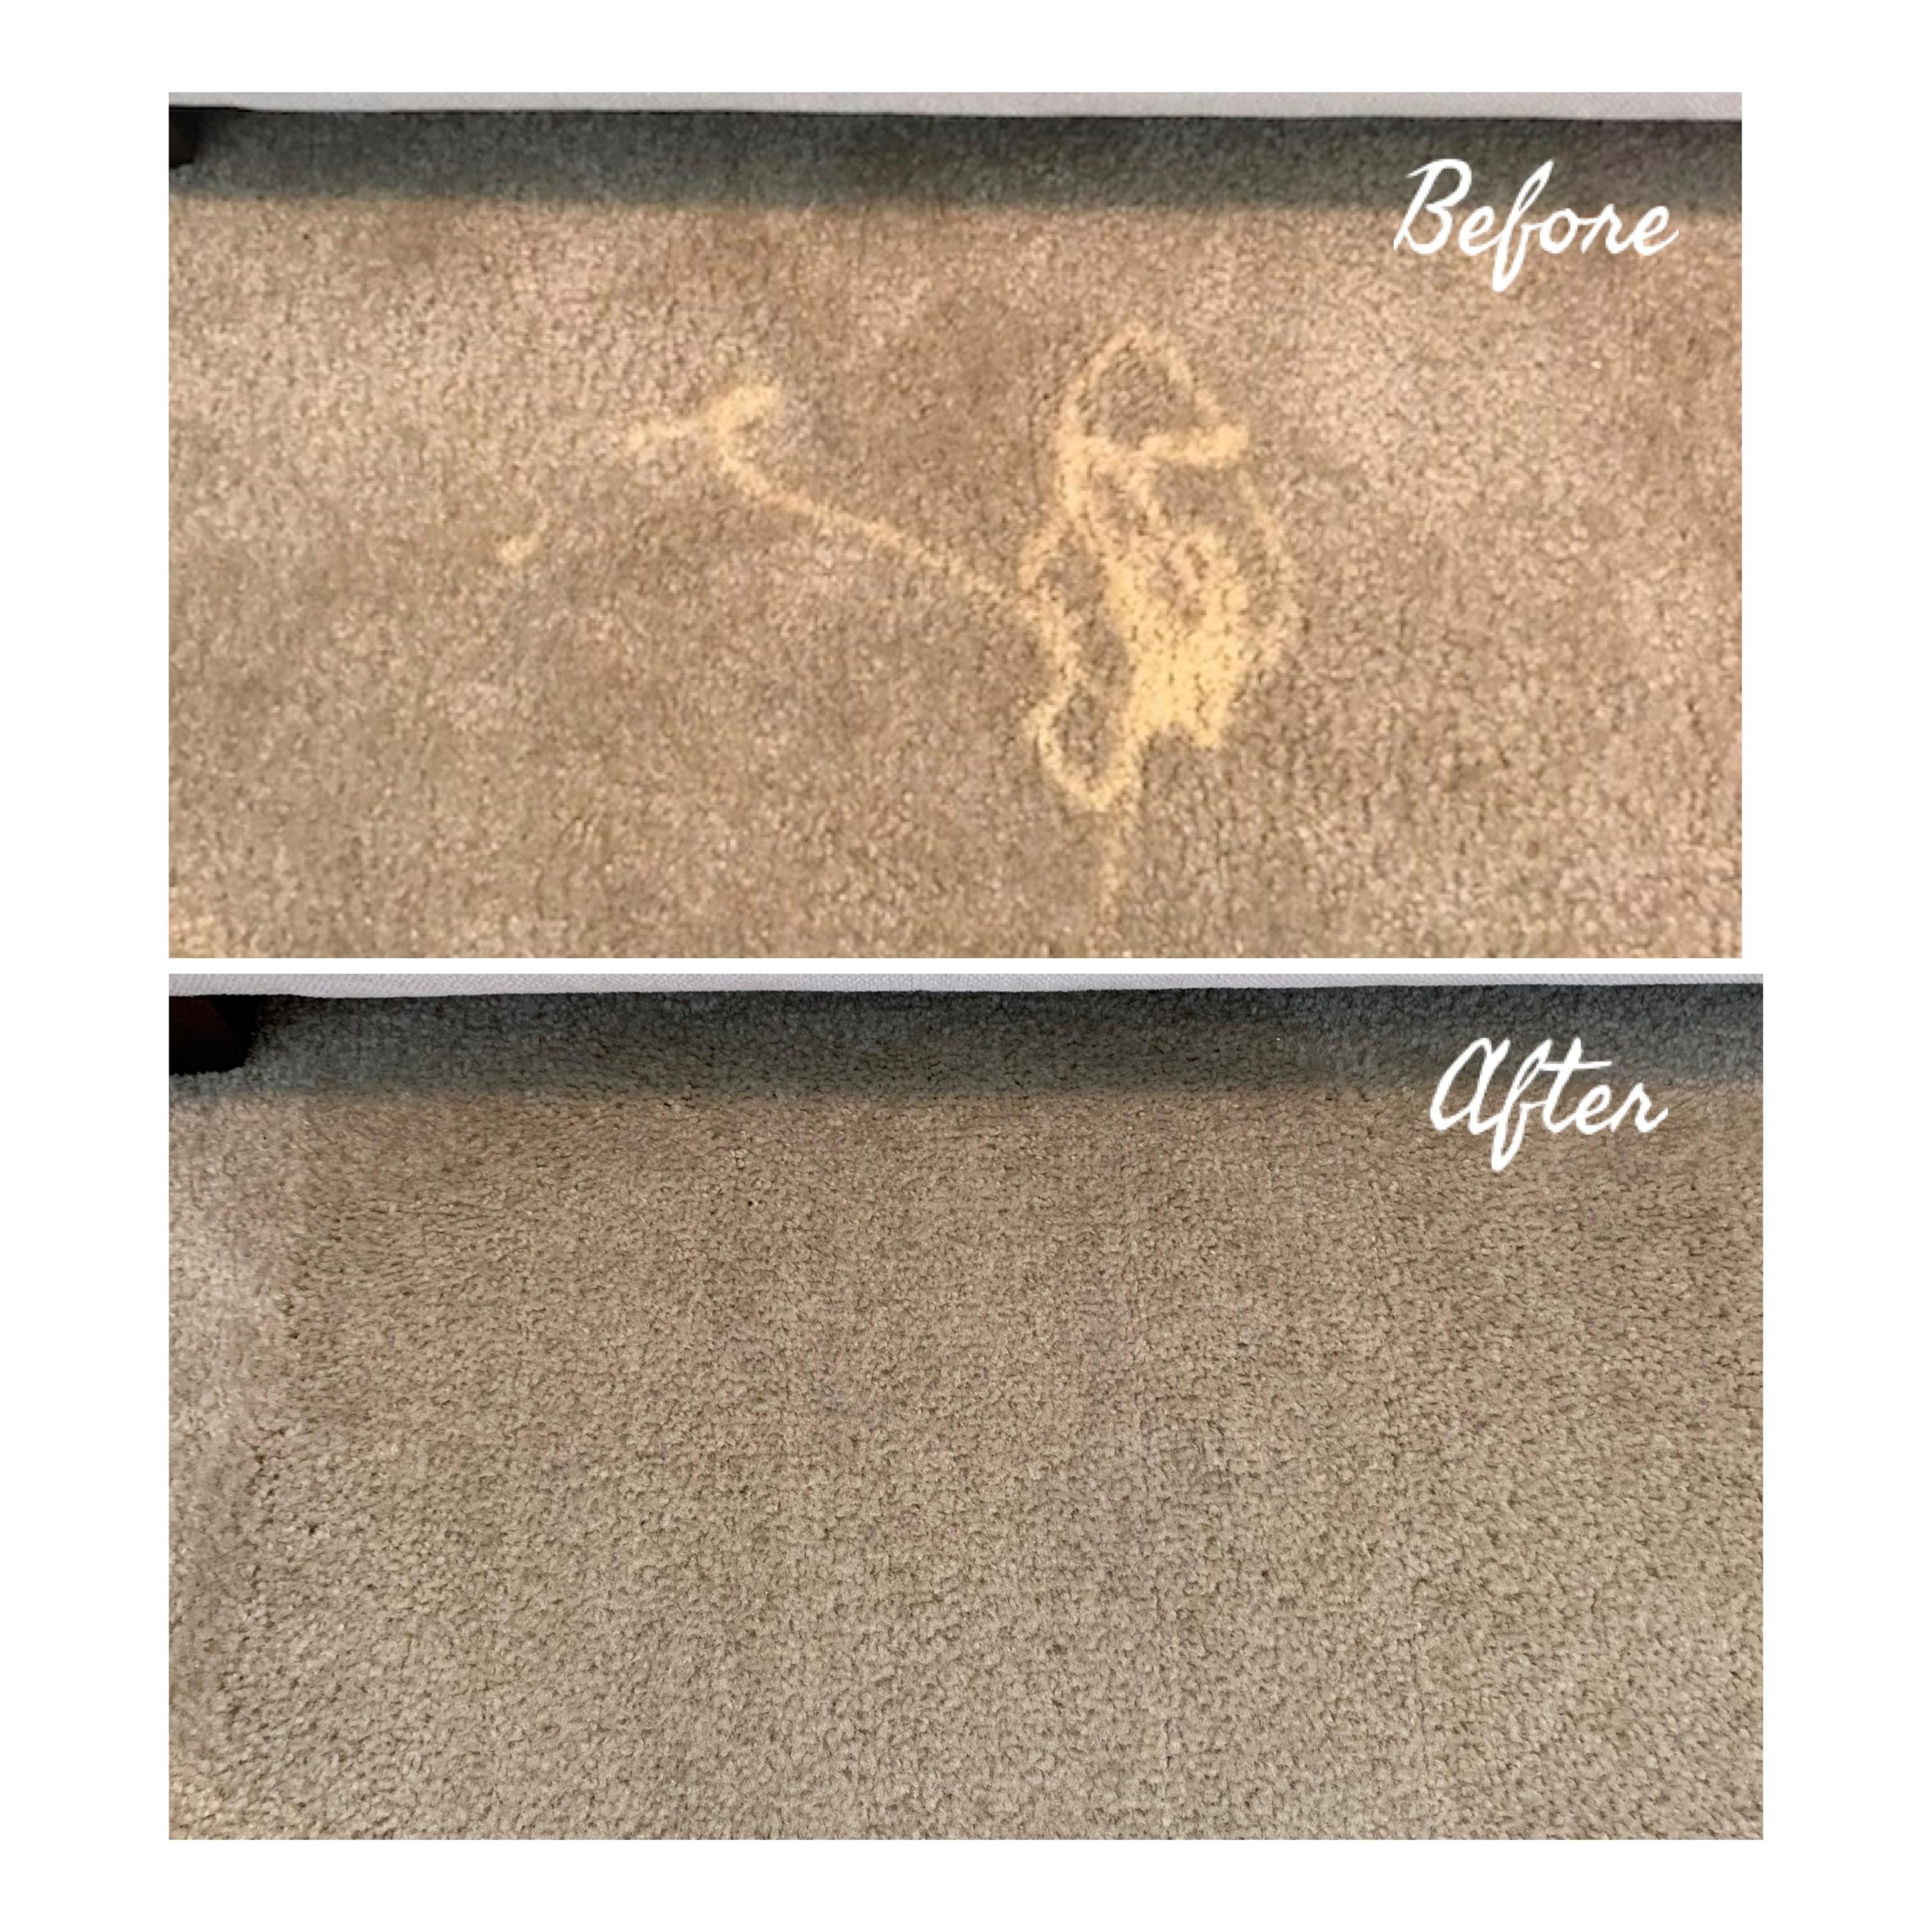 Sidematch Correction on Carpet in California